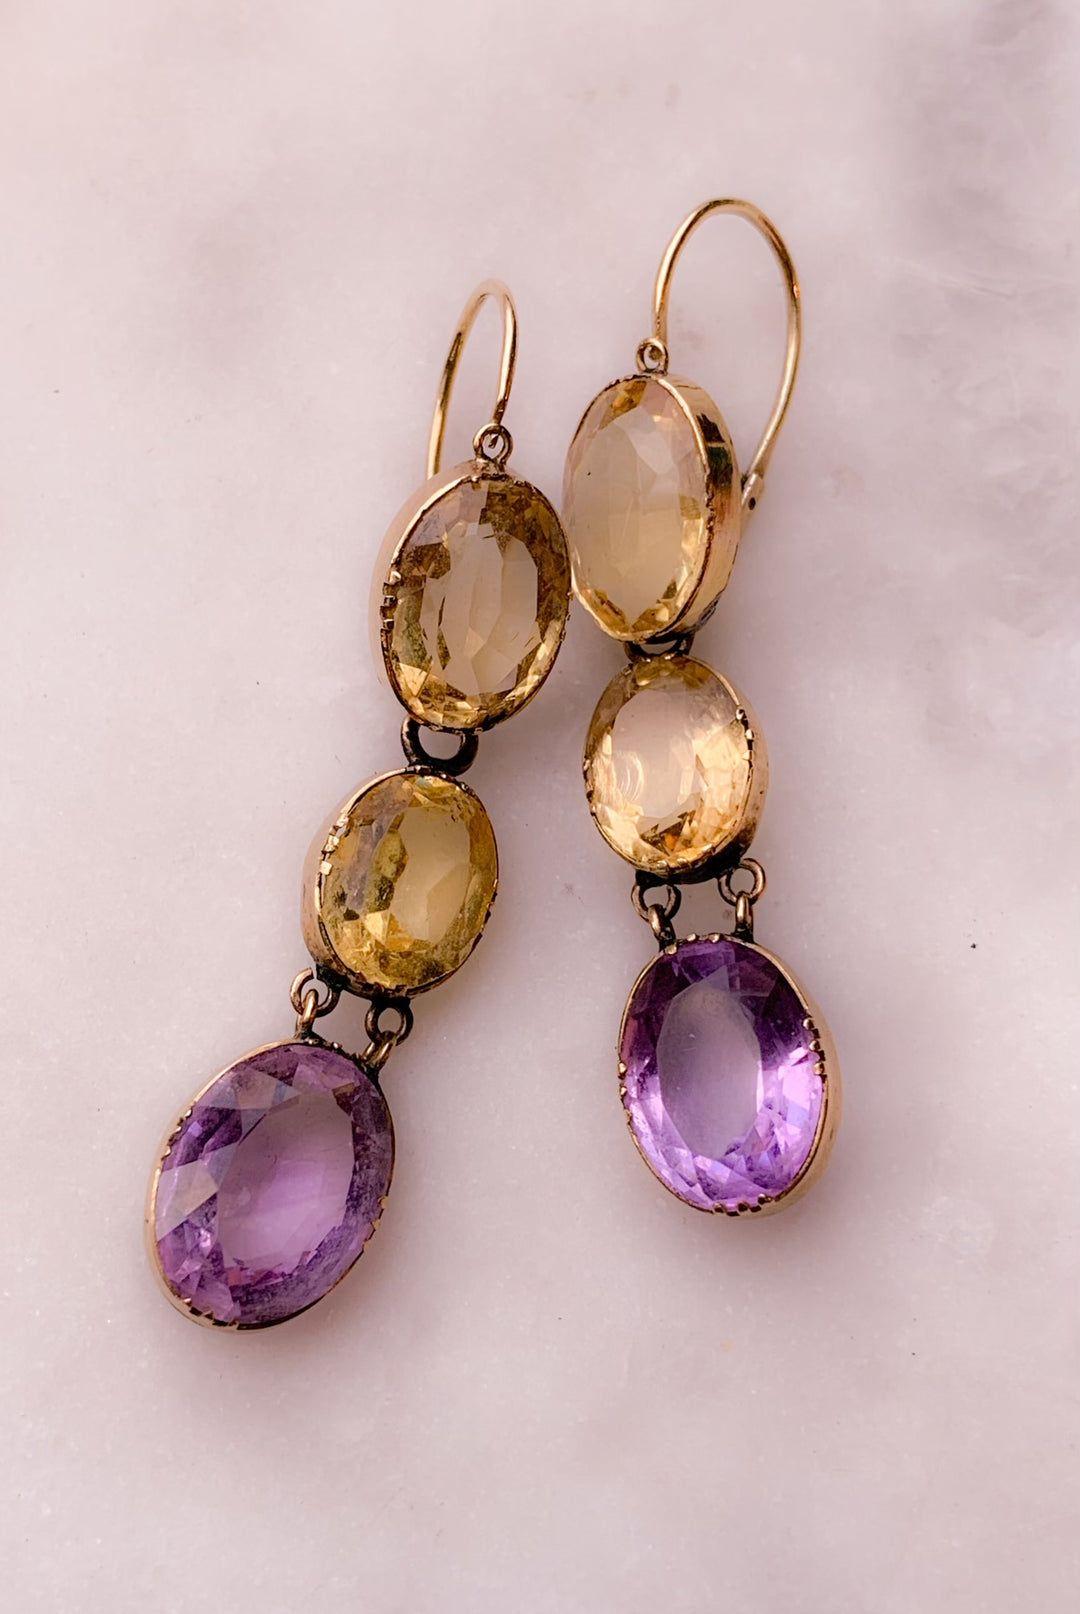 Amethyst and Citrine Day/Night Earrings in 15k Gold